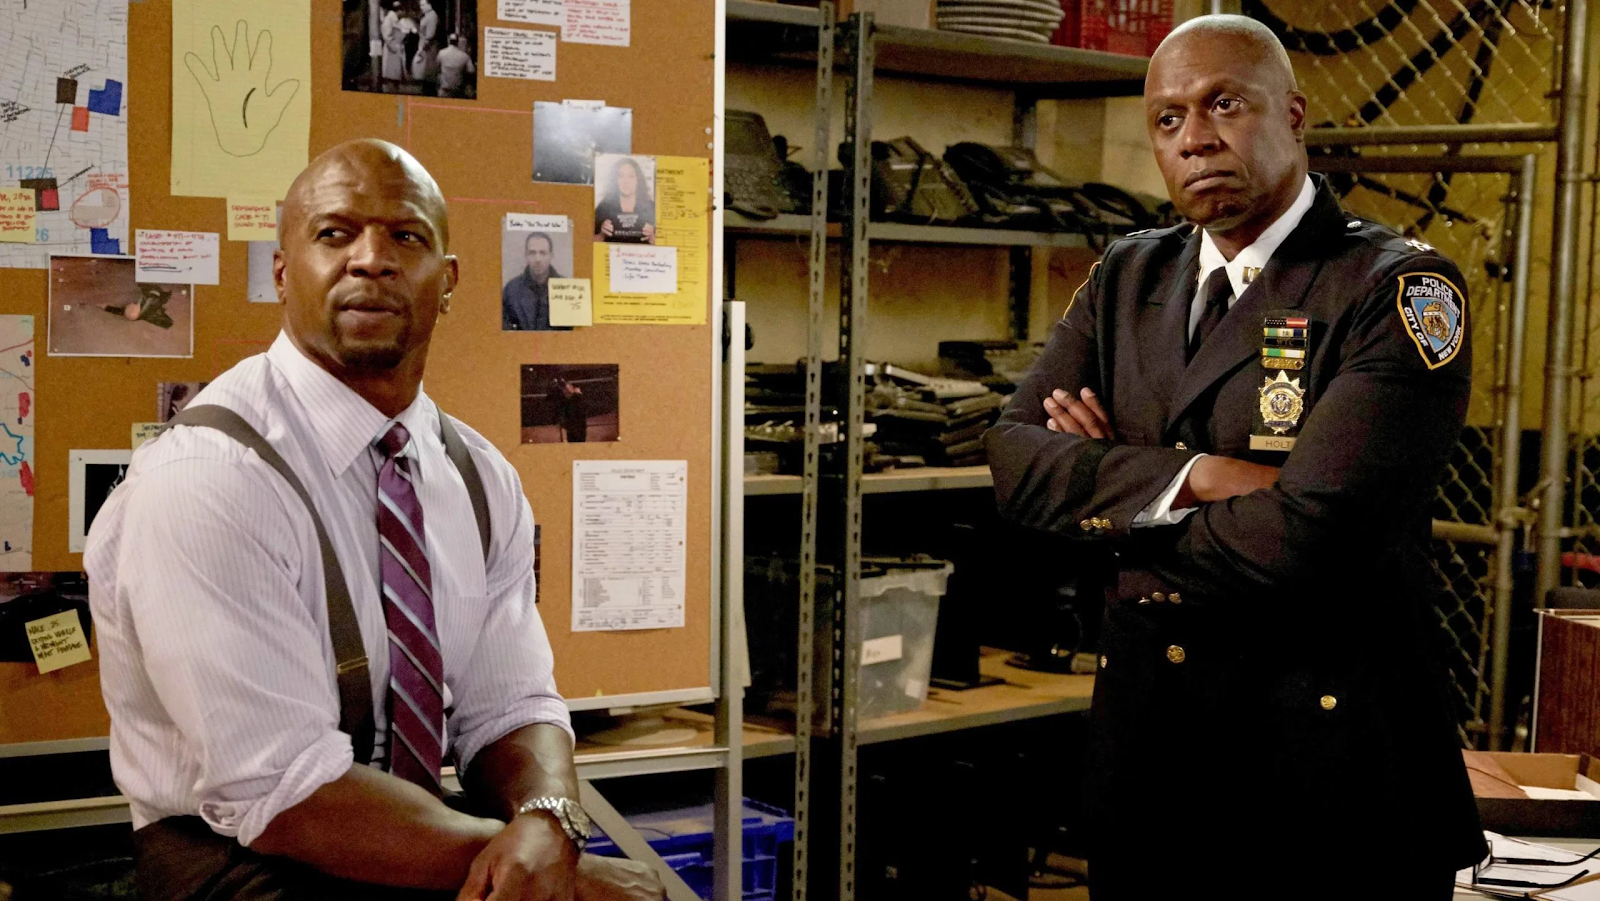 Terry and Holt, two Black police officers, in front of an evidence-filled cork board.